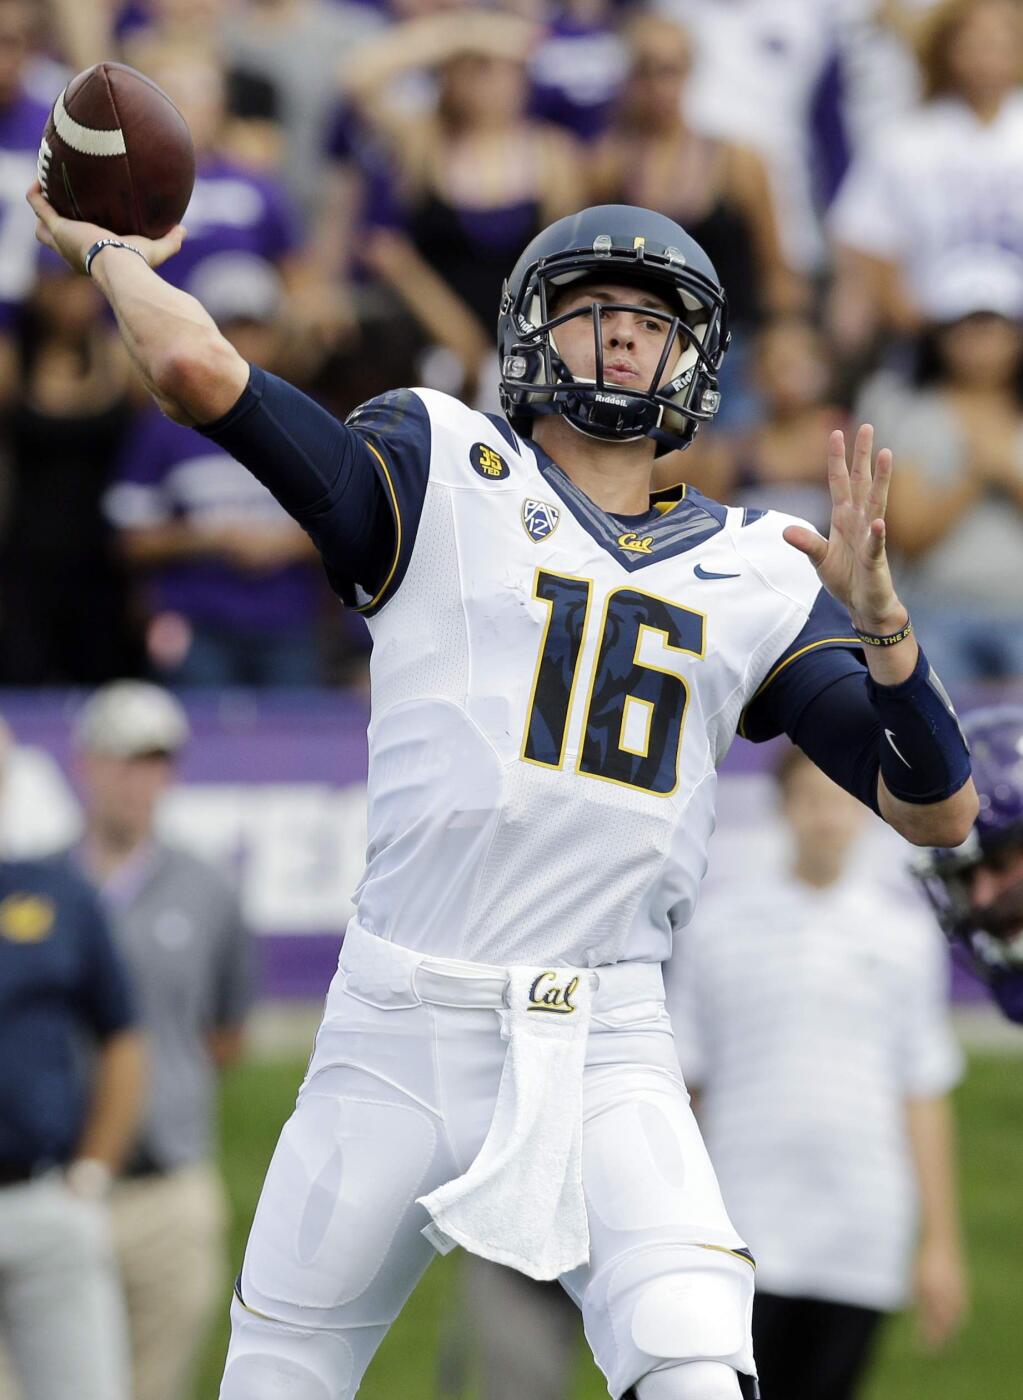 California quarterback Jared Goff (16) throws a pass during the first half of an NCAA college football game against Northwestern in Evanston, Ill., Saturday, Aug. 30, 2014. (AP Photo/Nam Y. Huh)